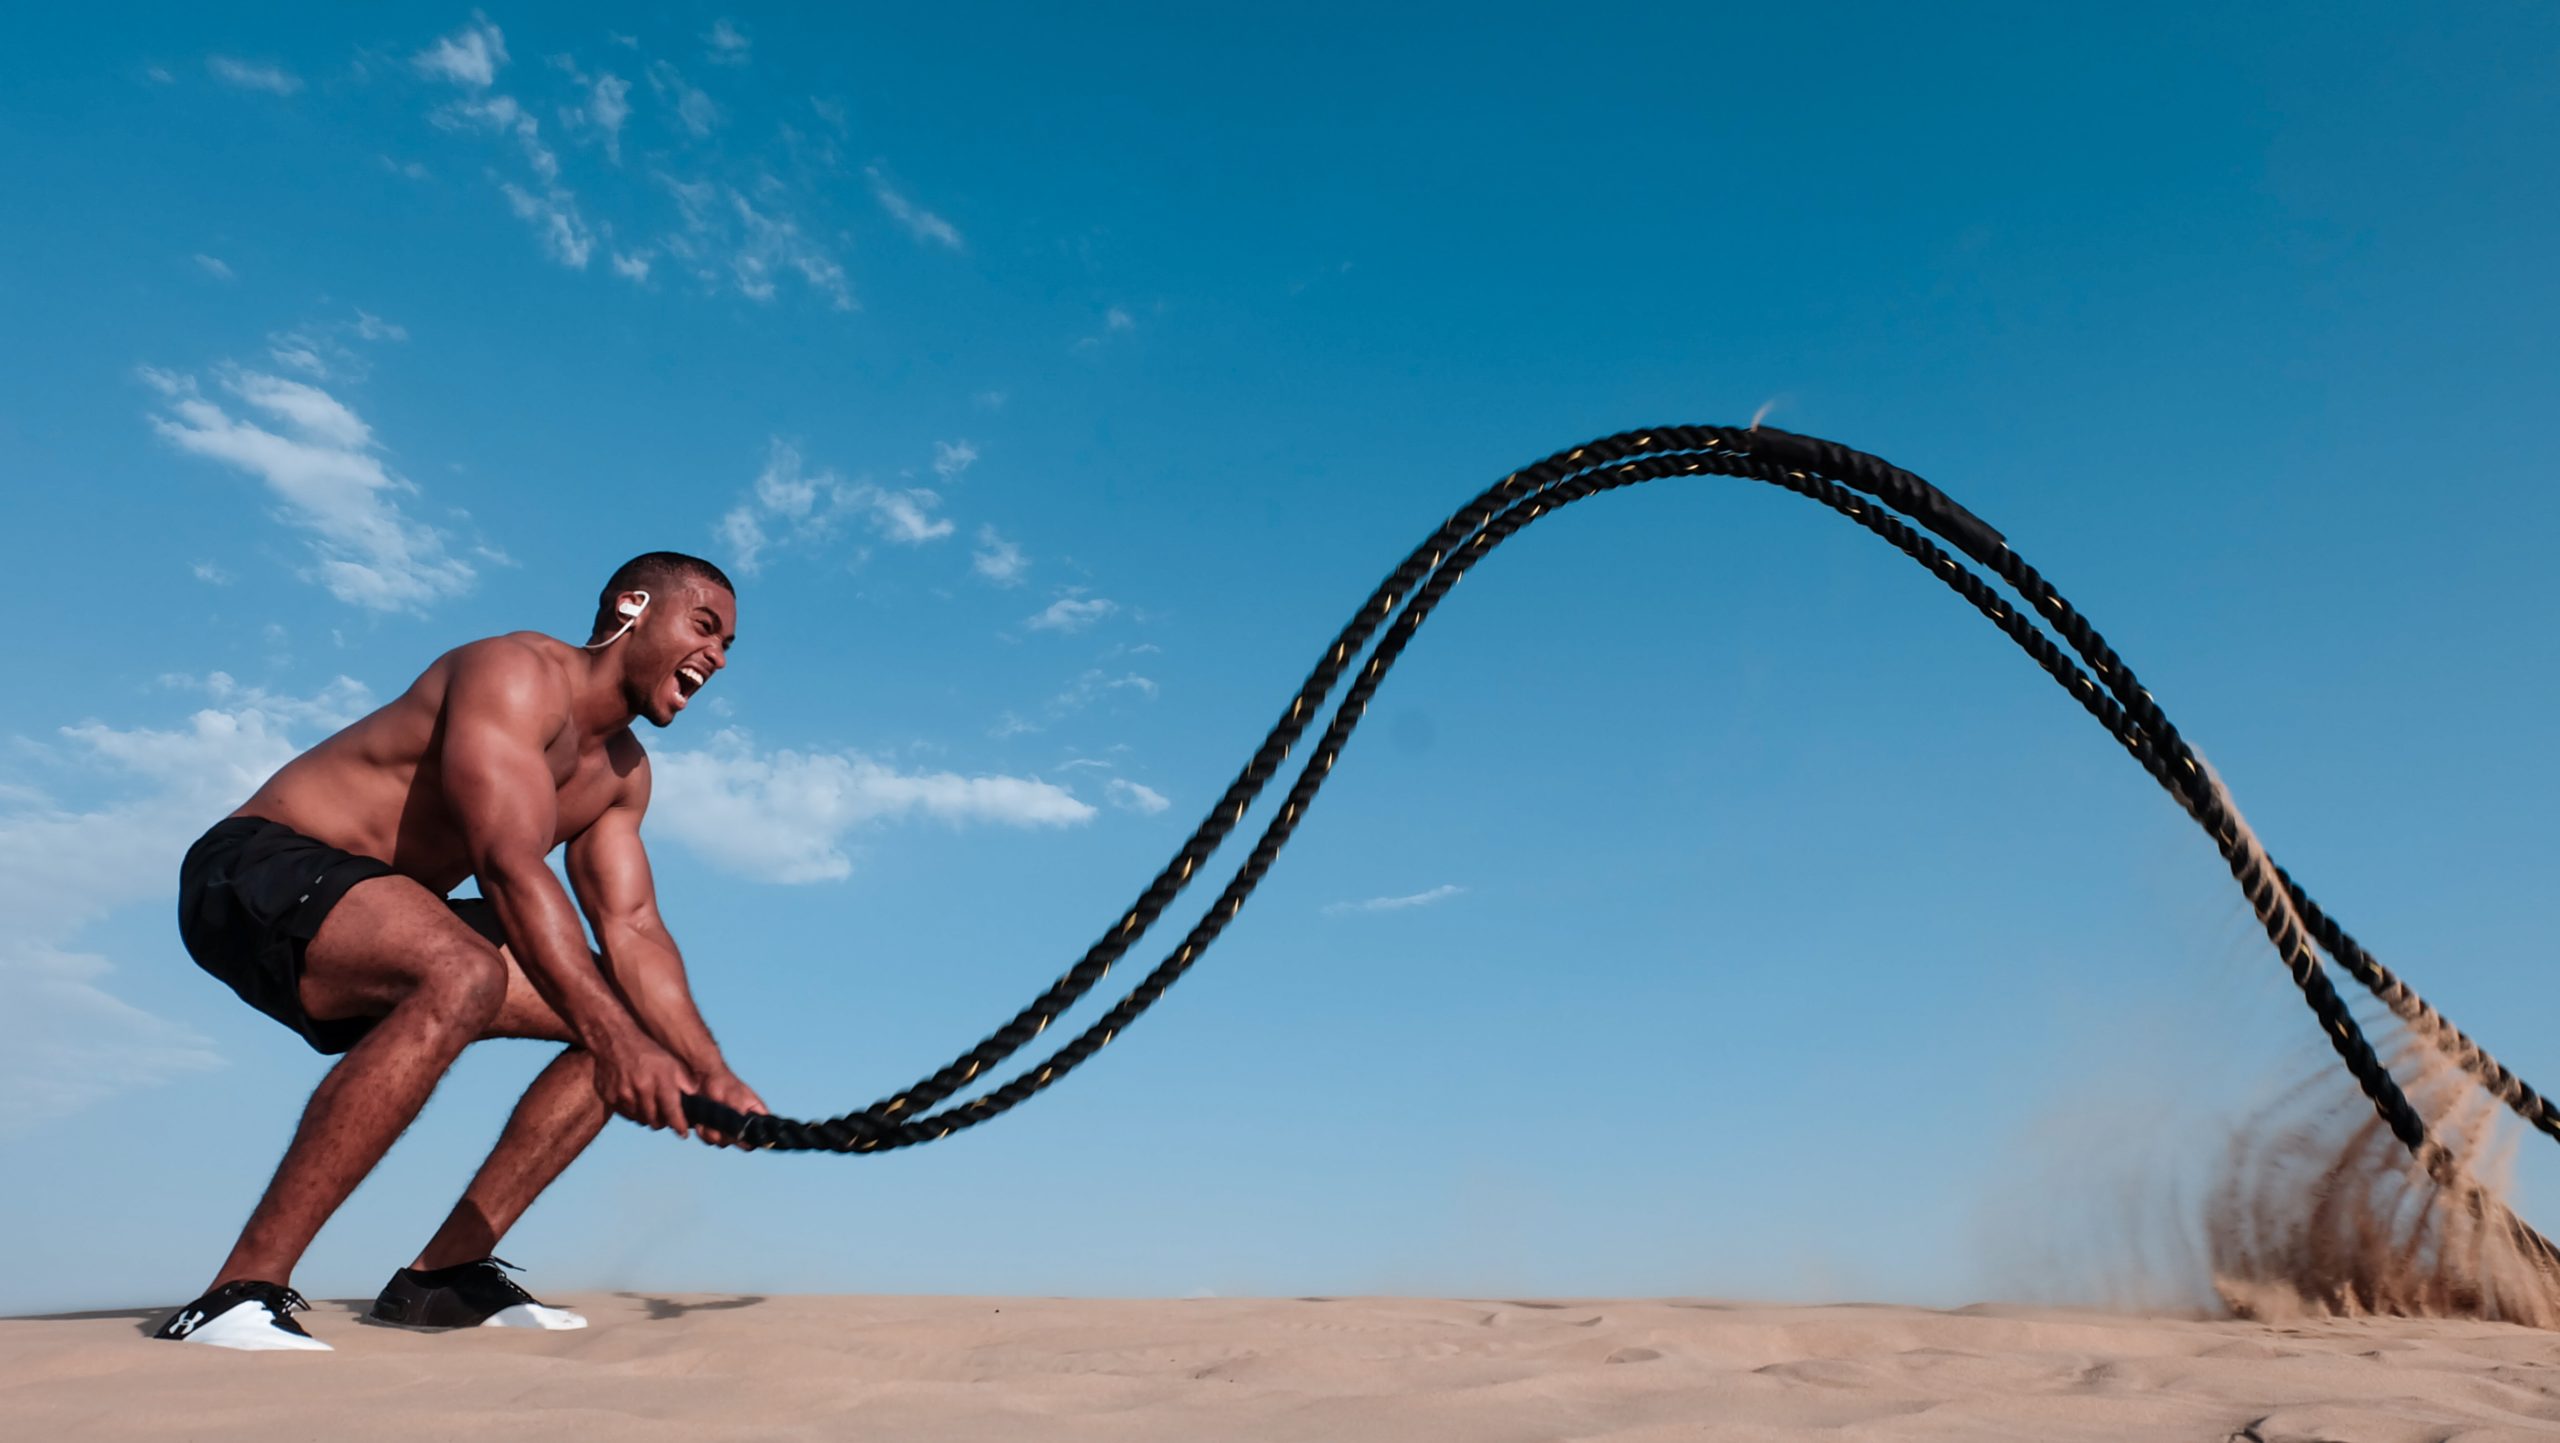 A man doing an intense rope training on a sandy ground